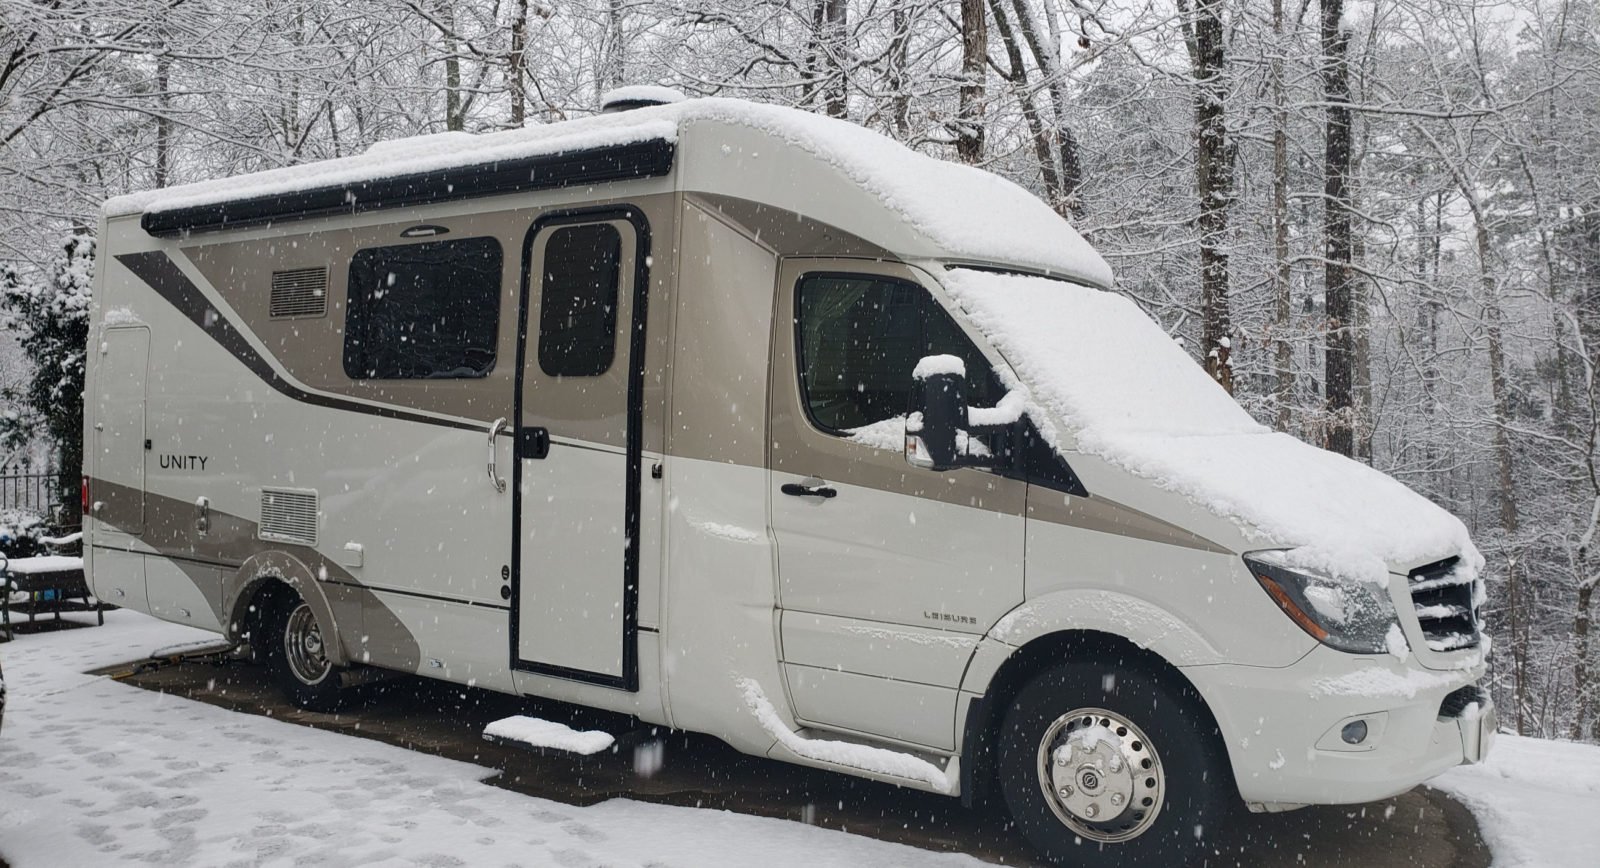 RV covered with snow